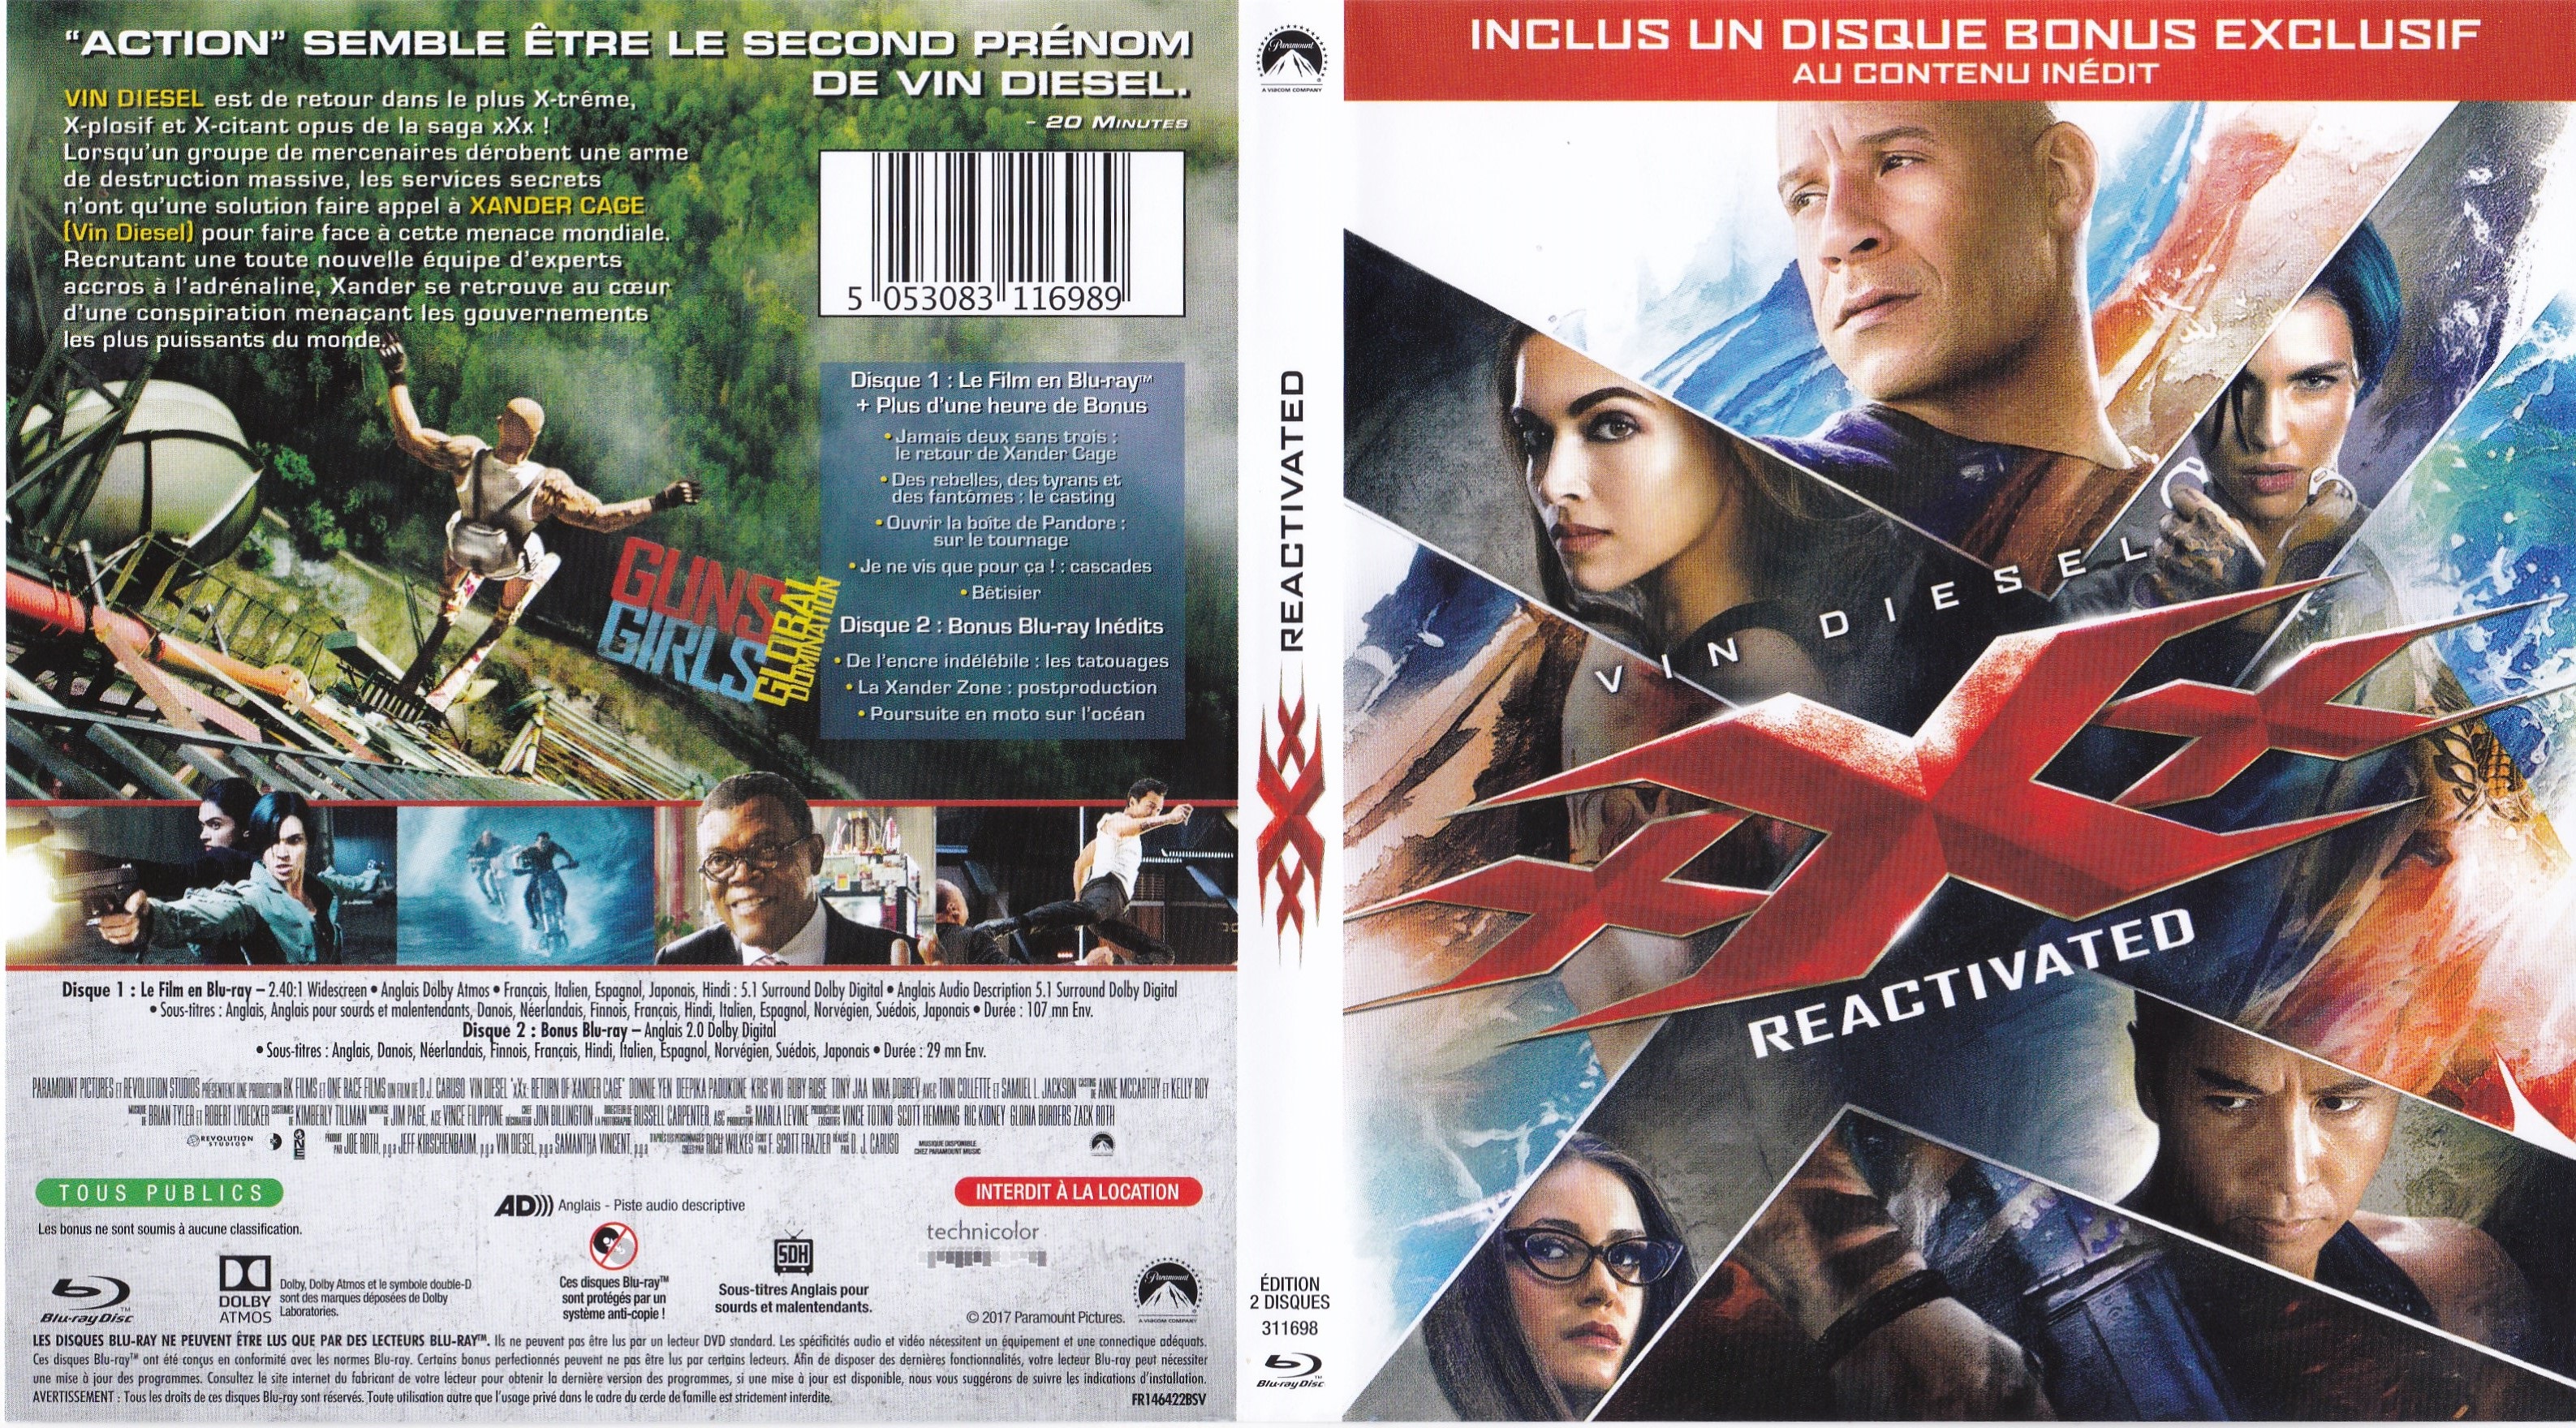 Jaquette DVD XXX reactivated (BLU-RAY)